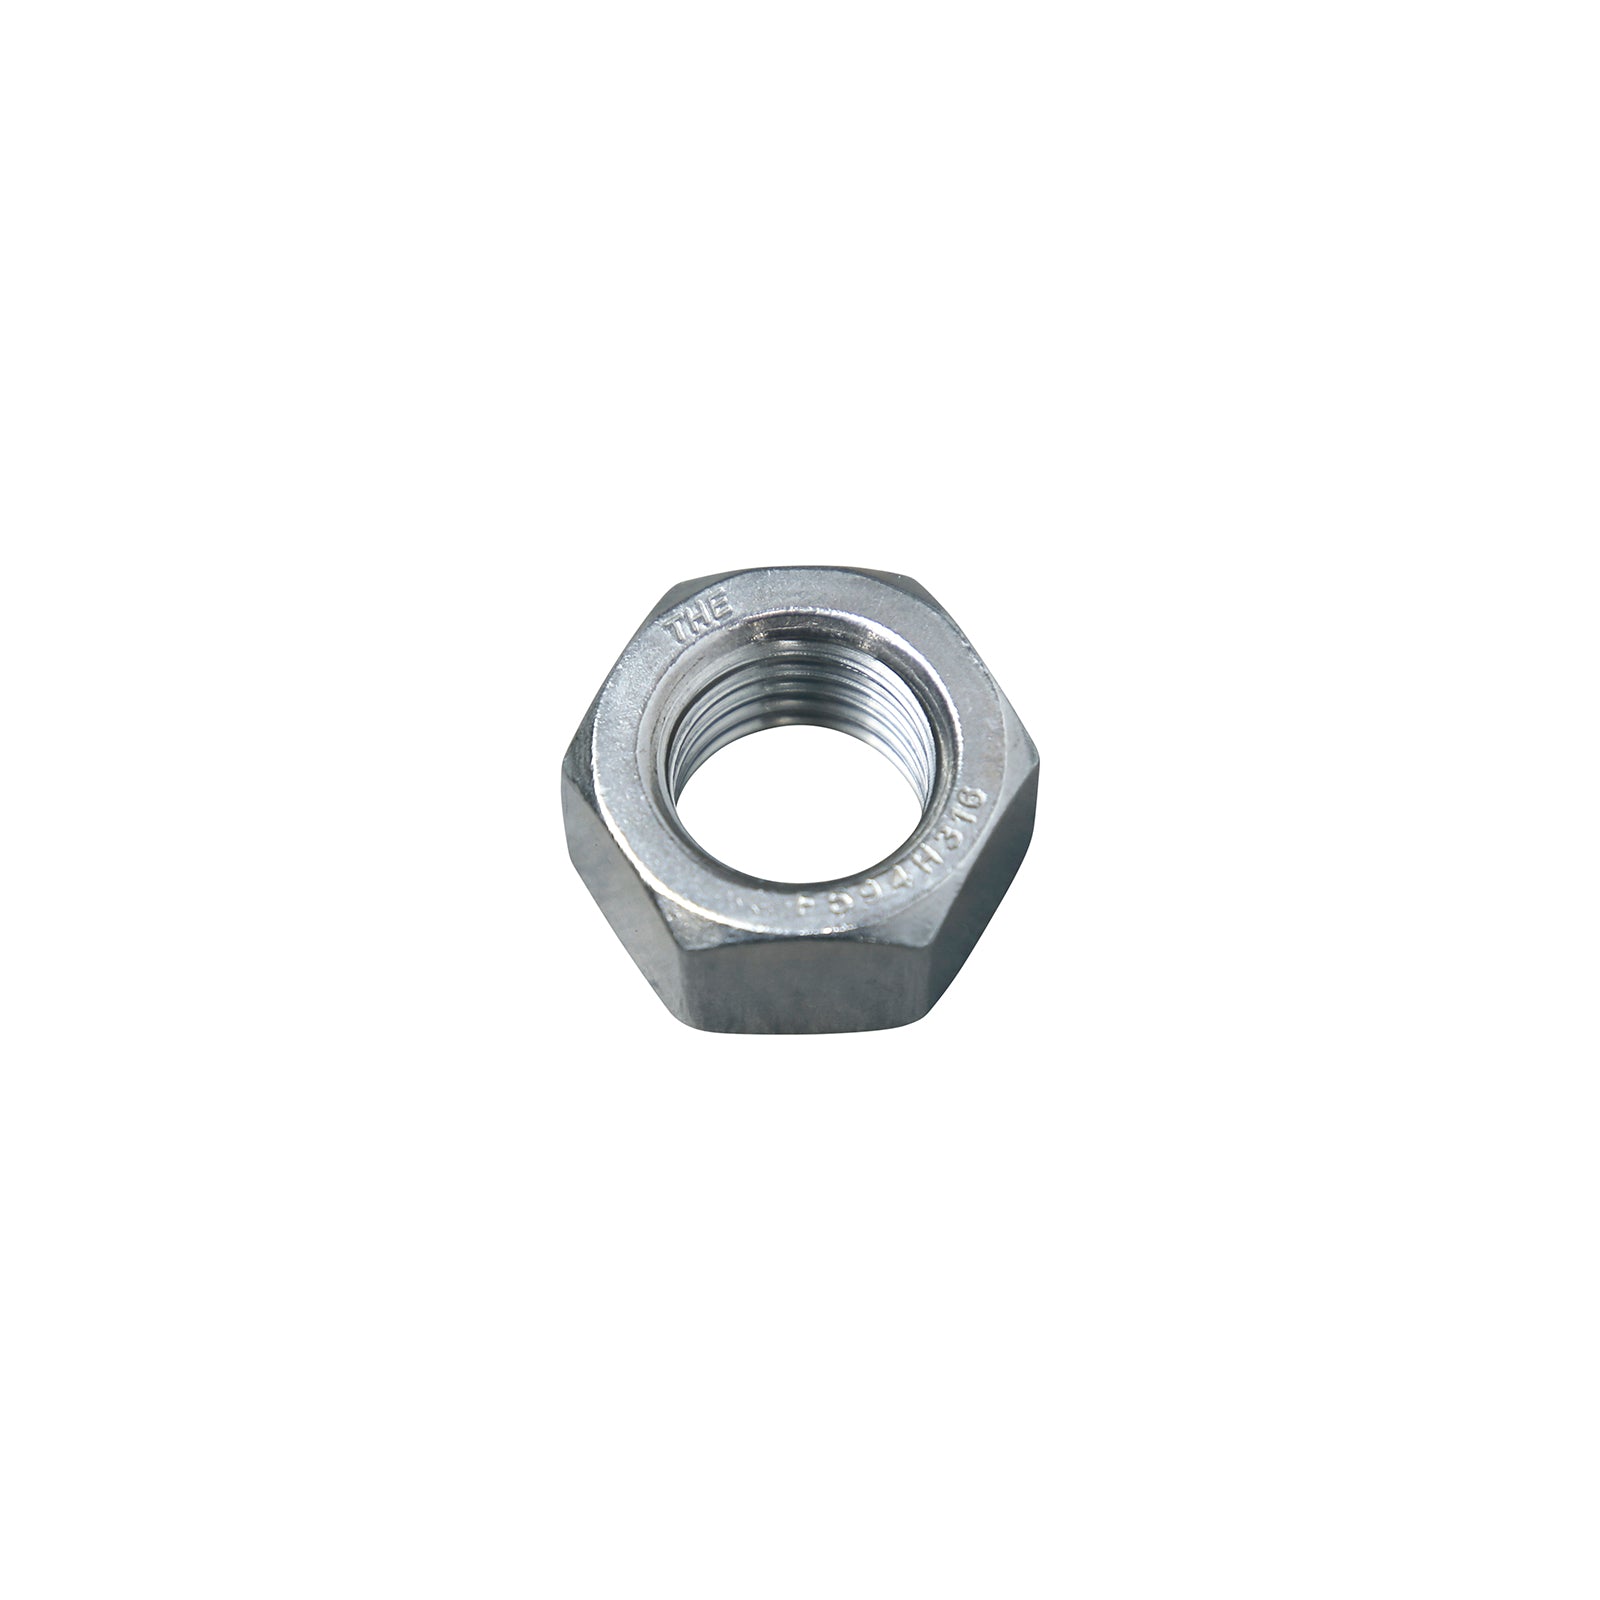 3/4"-10 Conquest Hex Nut - 316 Stainless Steel